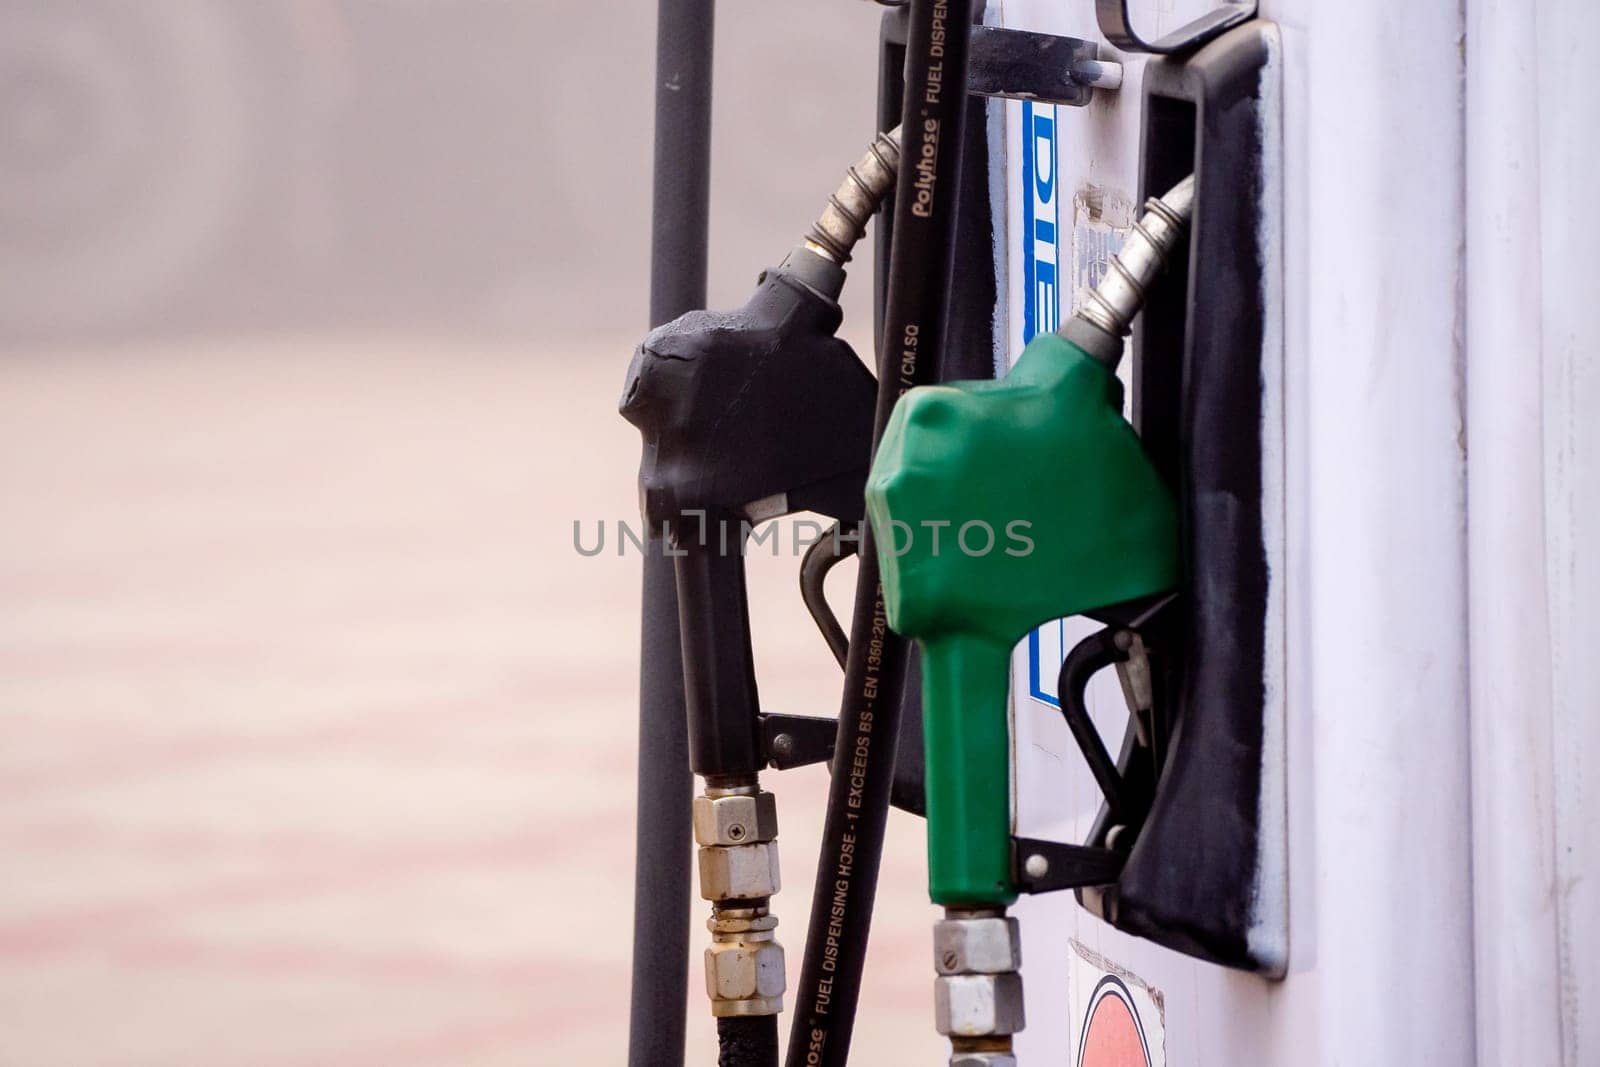 old damaged fuel pump nozzle showing petrol and deisel in india as the price increases and electric vehicles take over by Shalinimathur